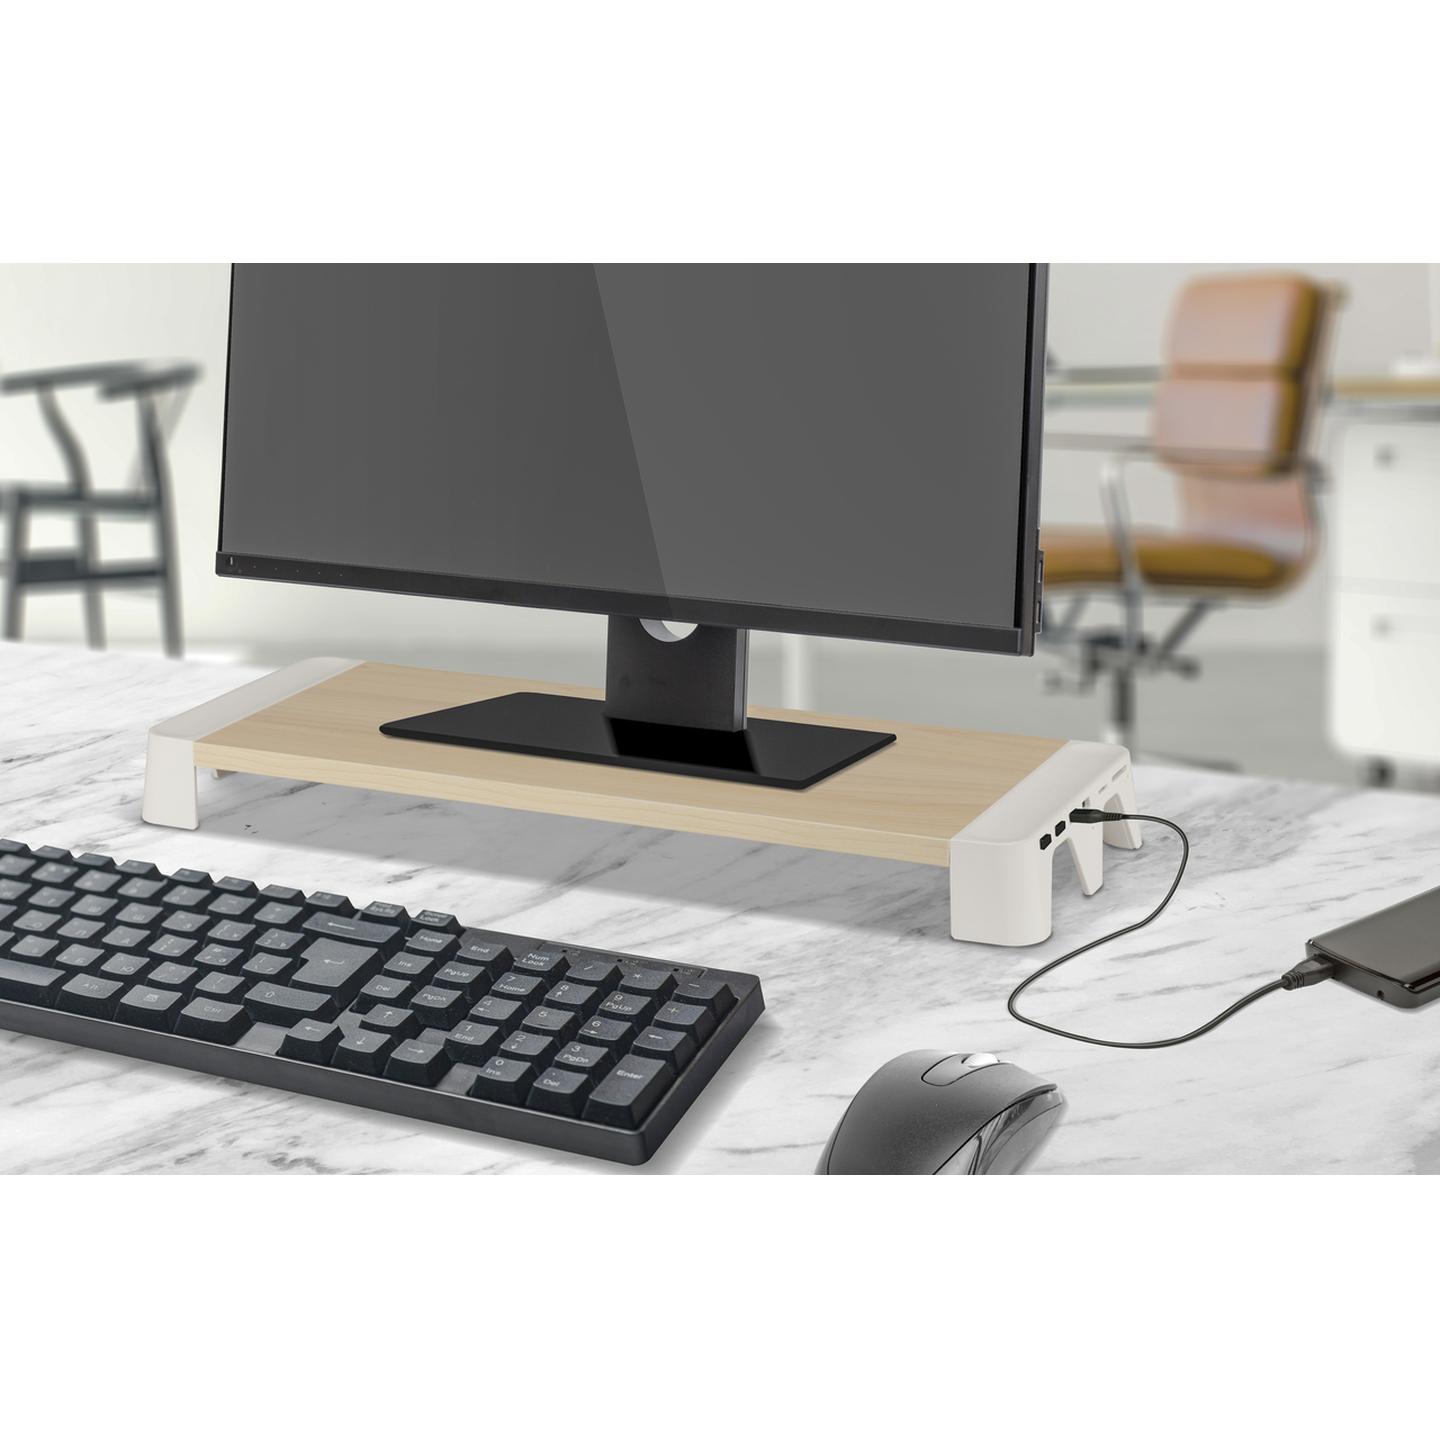 Monitor Stand with USB Hub and Card Reader